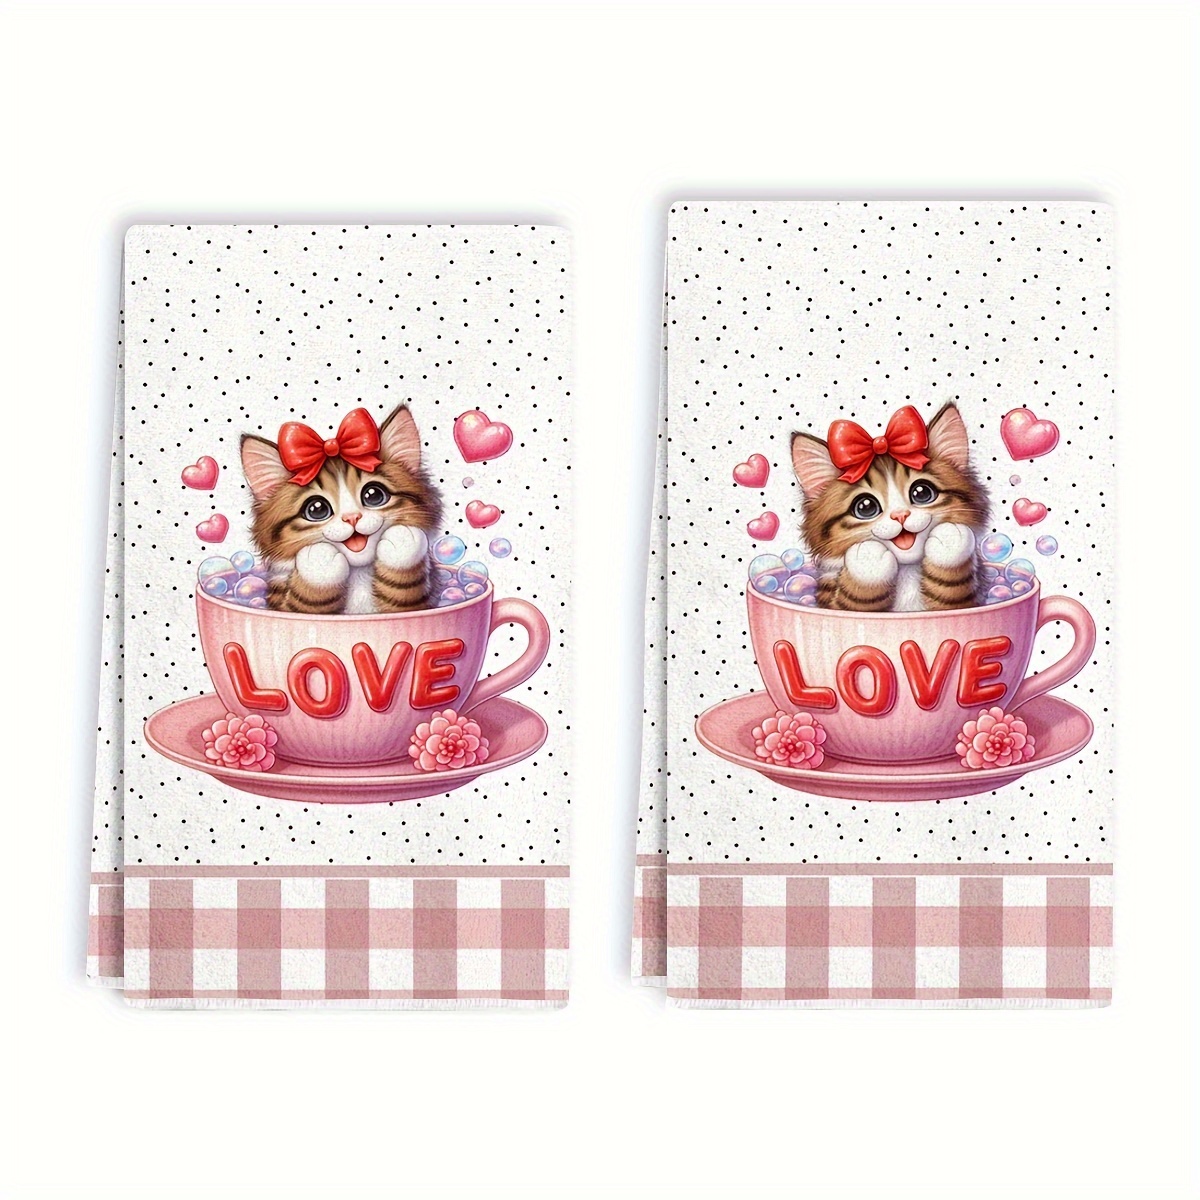 

2pcs, Hand Towels, Cute Kitty Pink Plaid Printed Dish Towels, Ultra-fine Microfiber Contemporary Absorbent Dish Cloths, Tea Towels For Cooking, Baking, Housewarming Gift